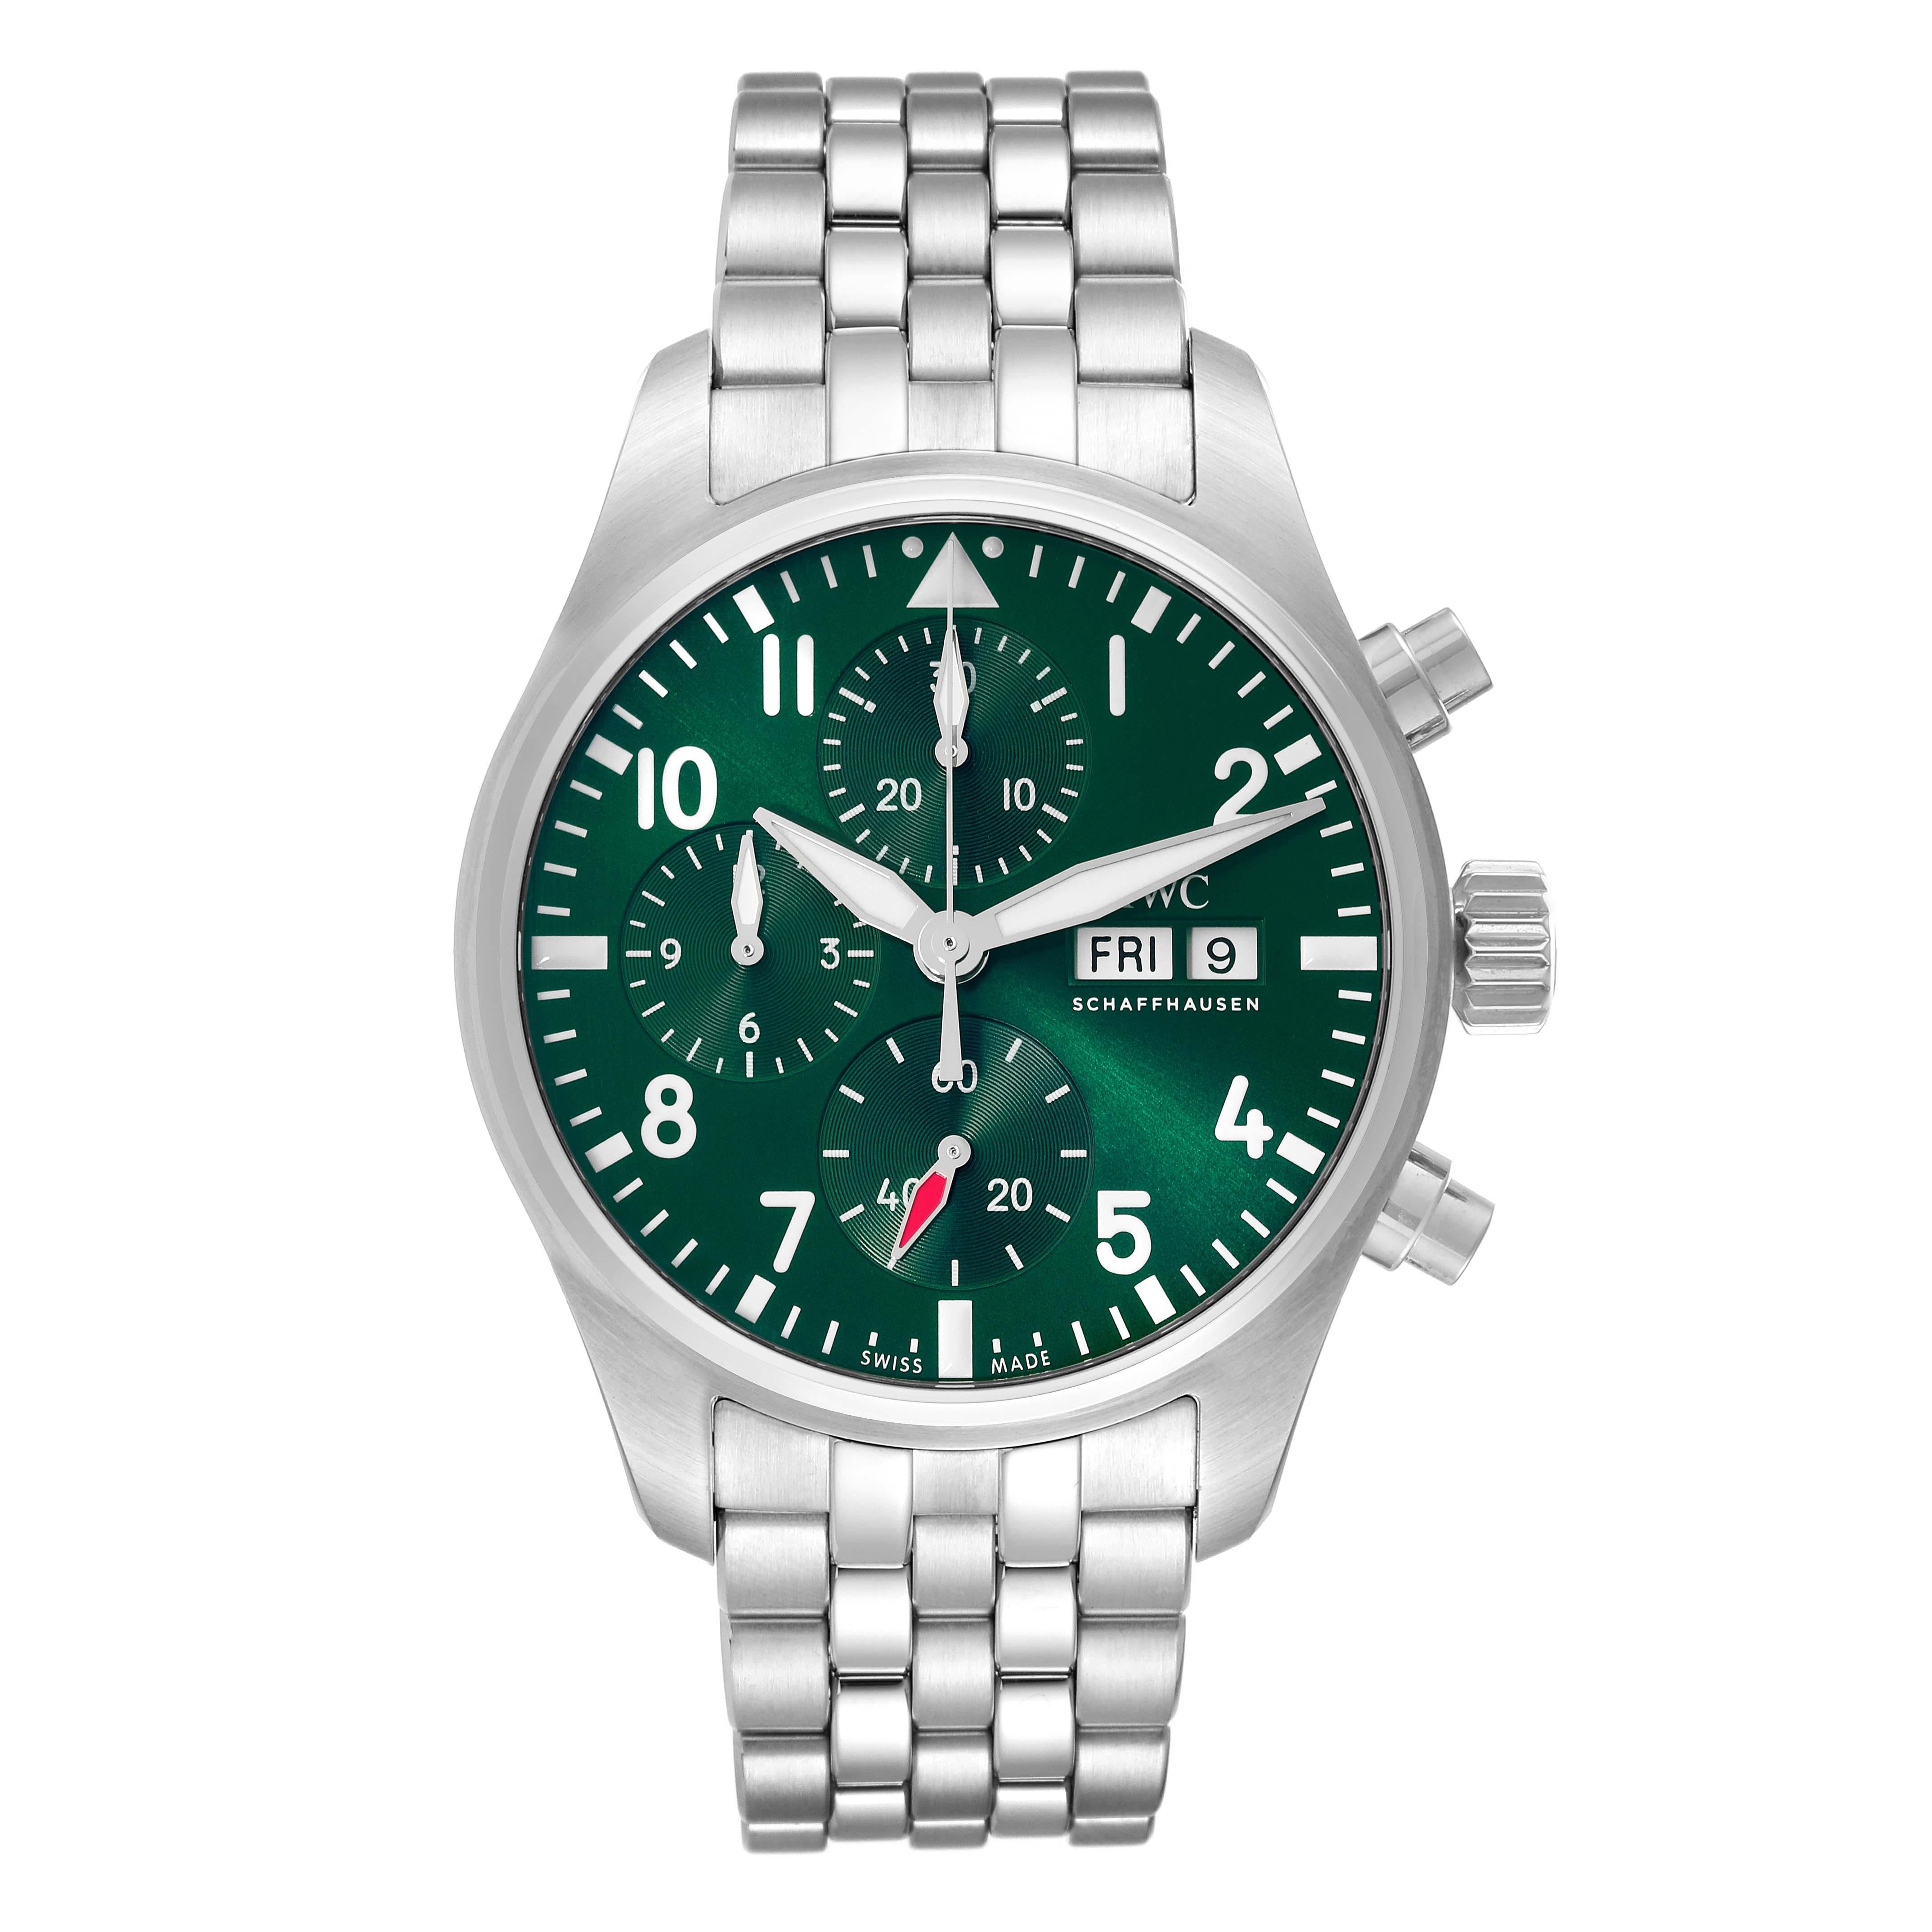 IWC Pilot Chronograph 41 Green Dial Steel Mens Watch IW388104 Box Card. Automatic self-winding chronograph movement. Stainless steel case 41 mm in diameter. Screw in crown. Transparent exhibition sapphire crystal caseback. . Scratch resistant